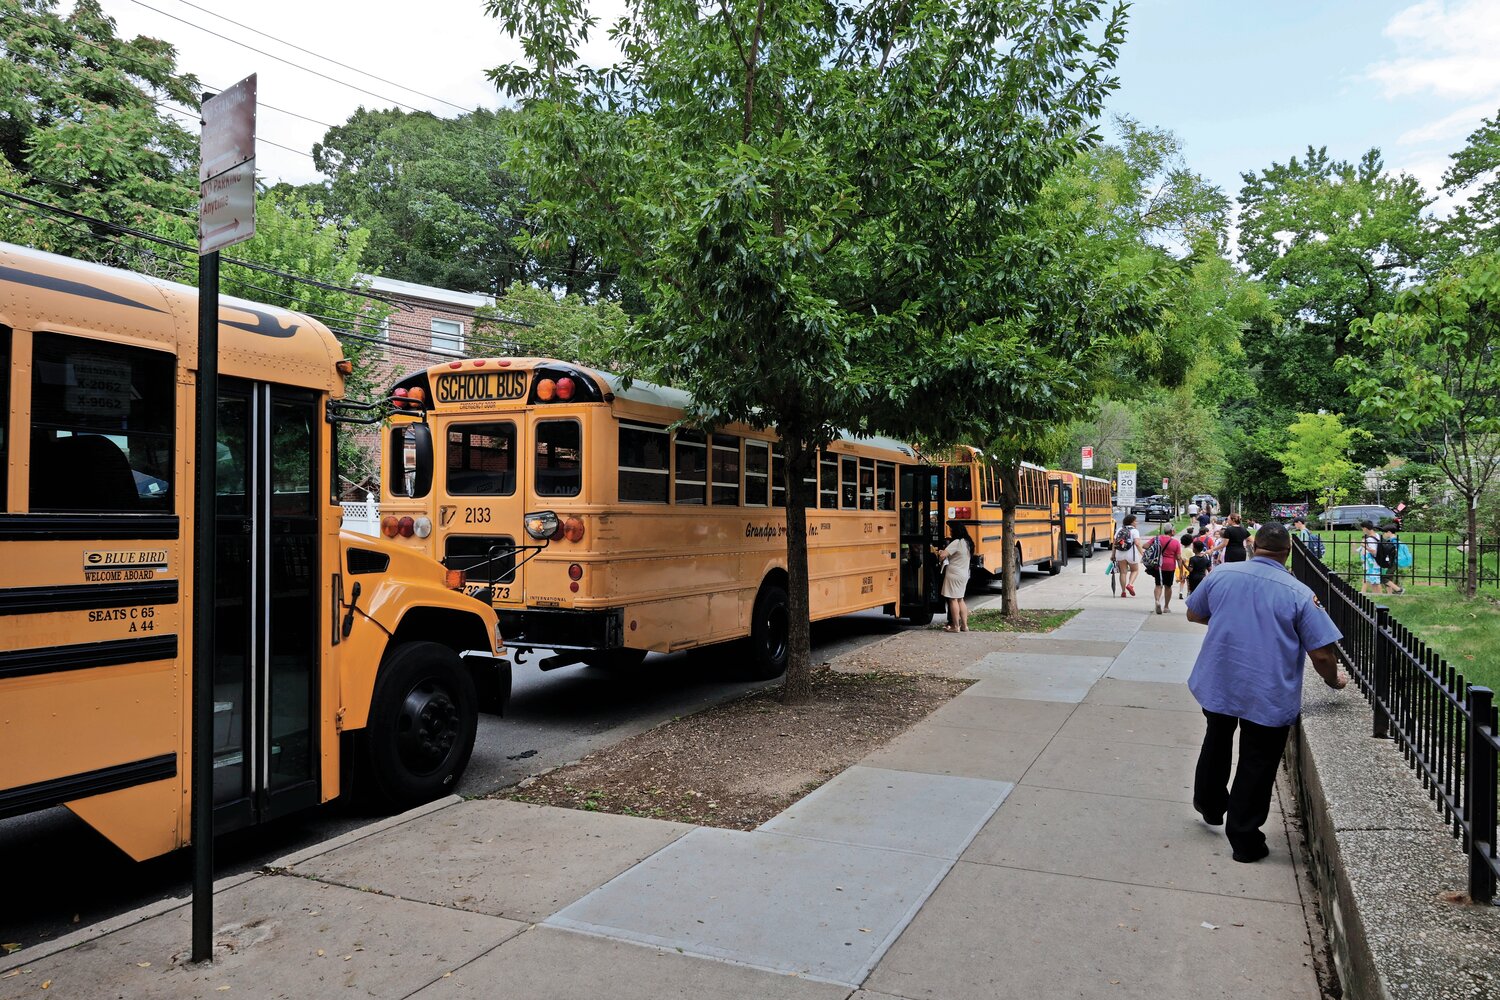 Parents could breathe on the first day of school as the bus strike was averted on Thursday, Friday, and the following Monday.  A strike still might happen in the next few weeks. The city’s education department warned parents about possible delays because of negotiations. However, according to the education department data, approximately 500 school buses were delayed on the first day.